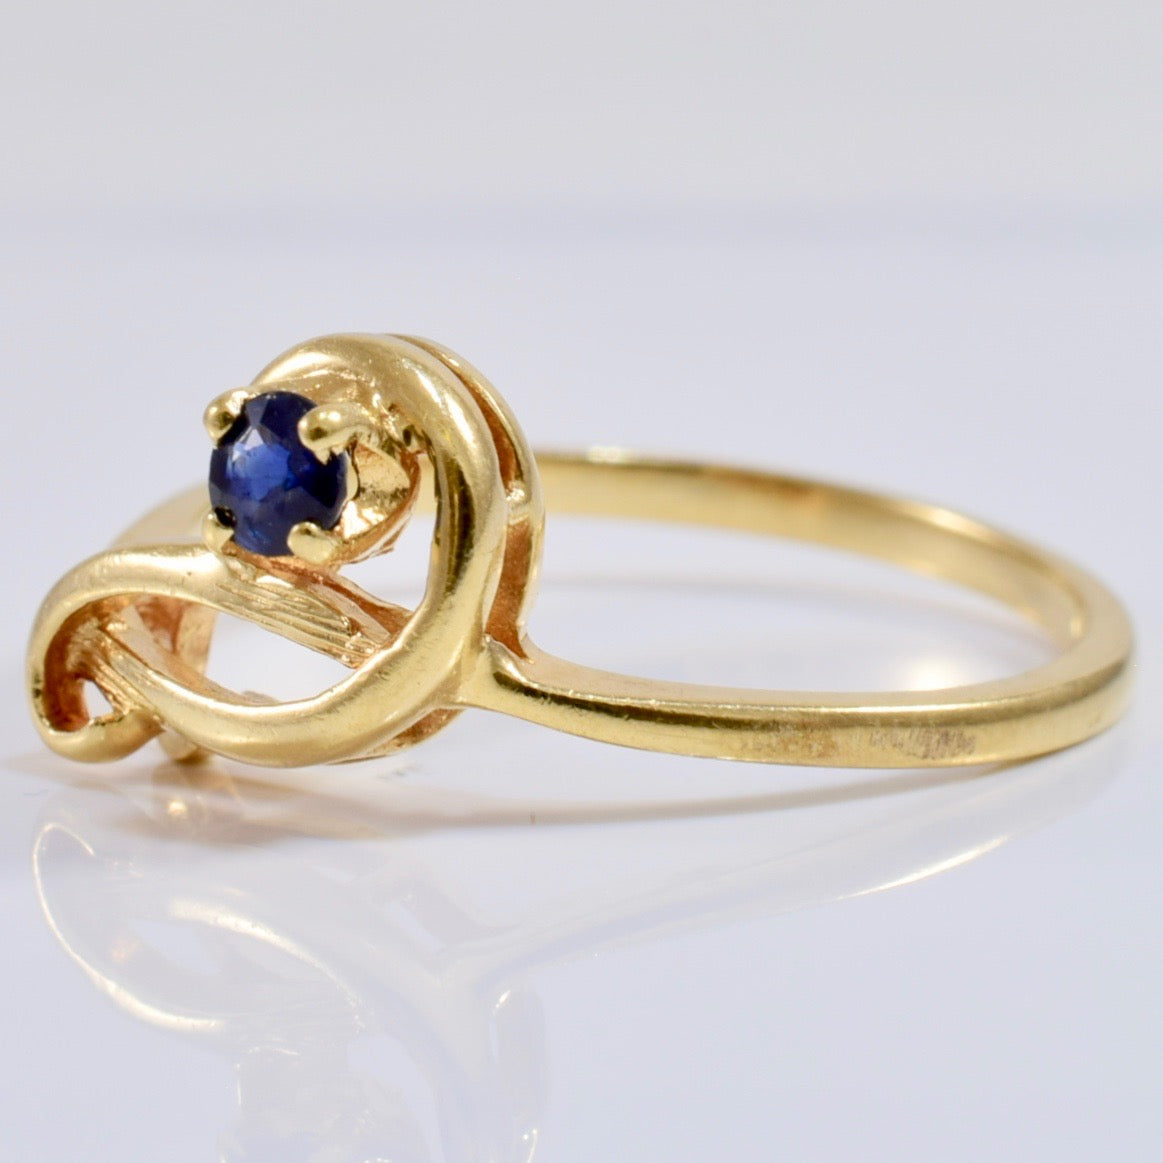 Solitaire Sapphire Ring | SZ 6.75 |